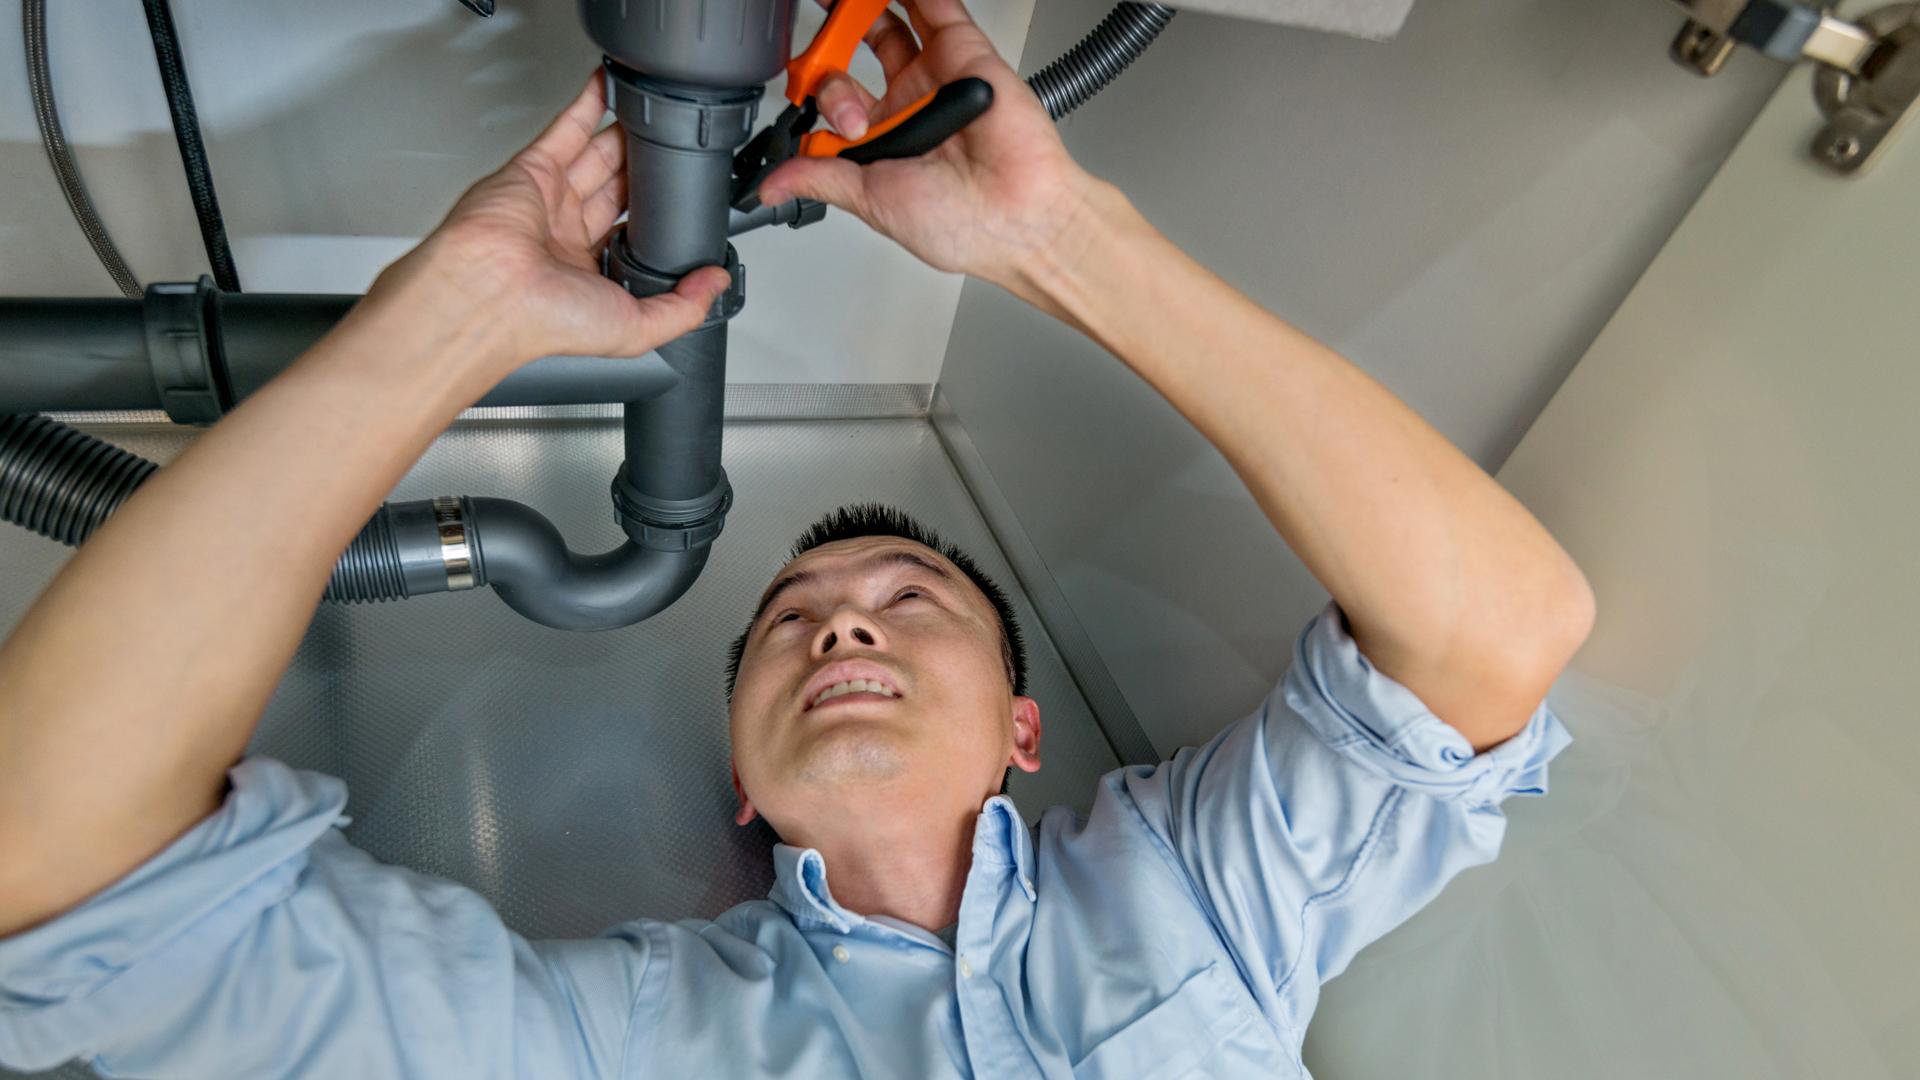 1 in 3 Homeowners Spends Over $4,000 Per Year on Maintenance: 6 Clever Ways To Cut Costs